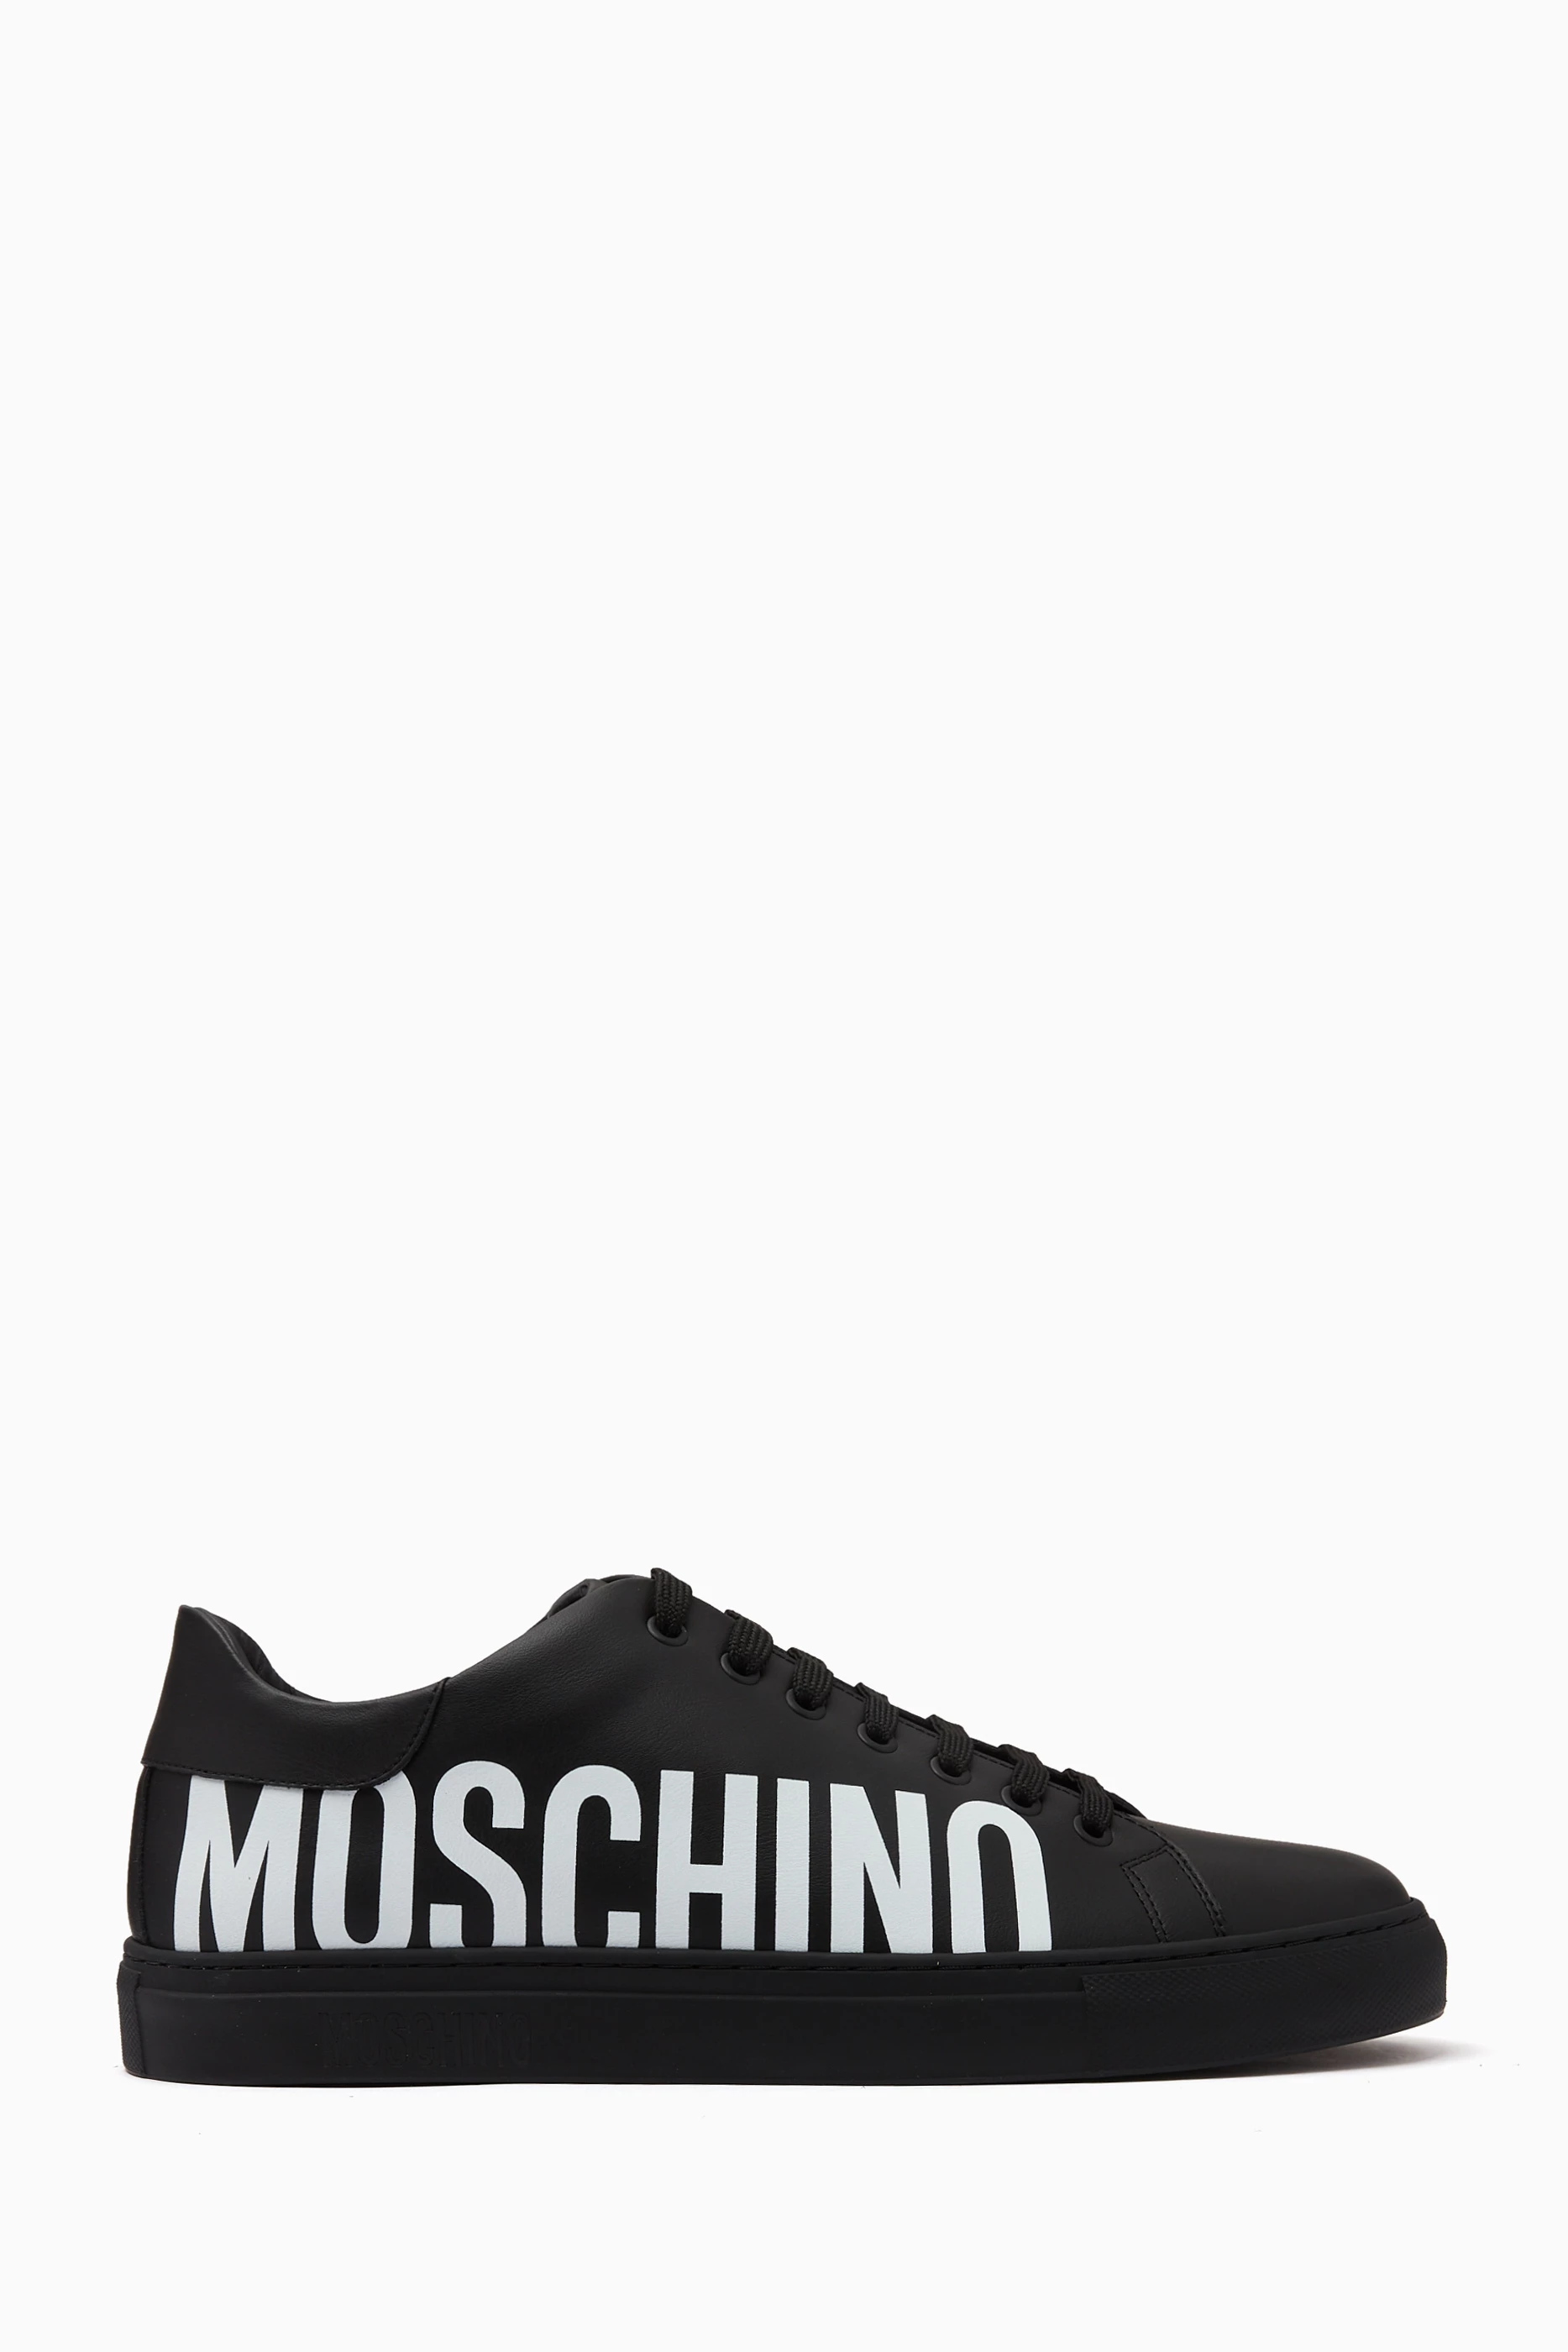 Moschino Sneakers With Logo in White